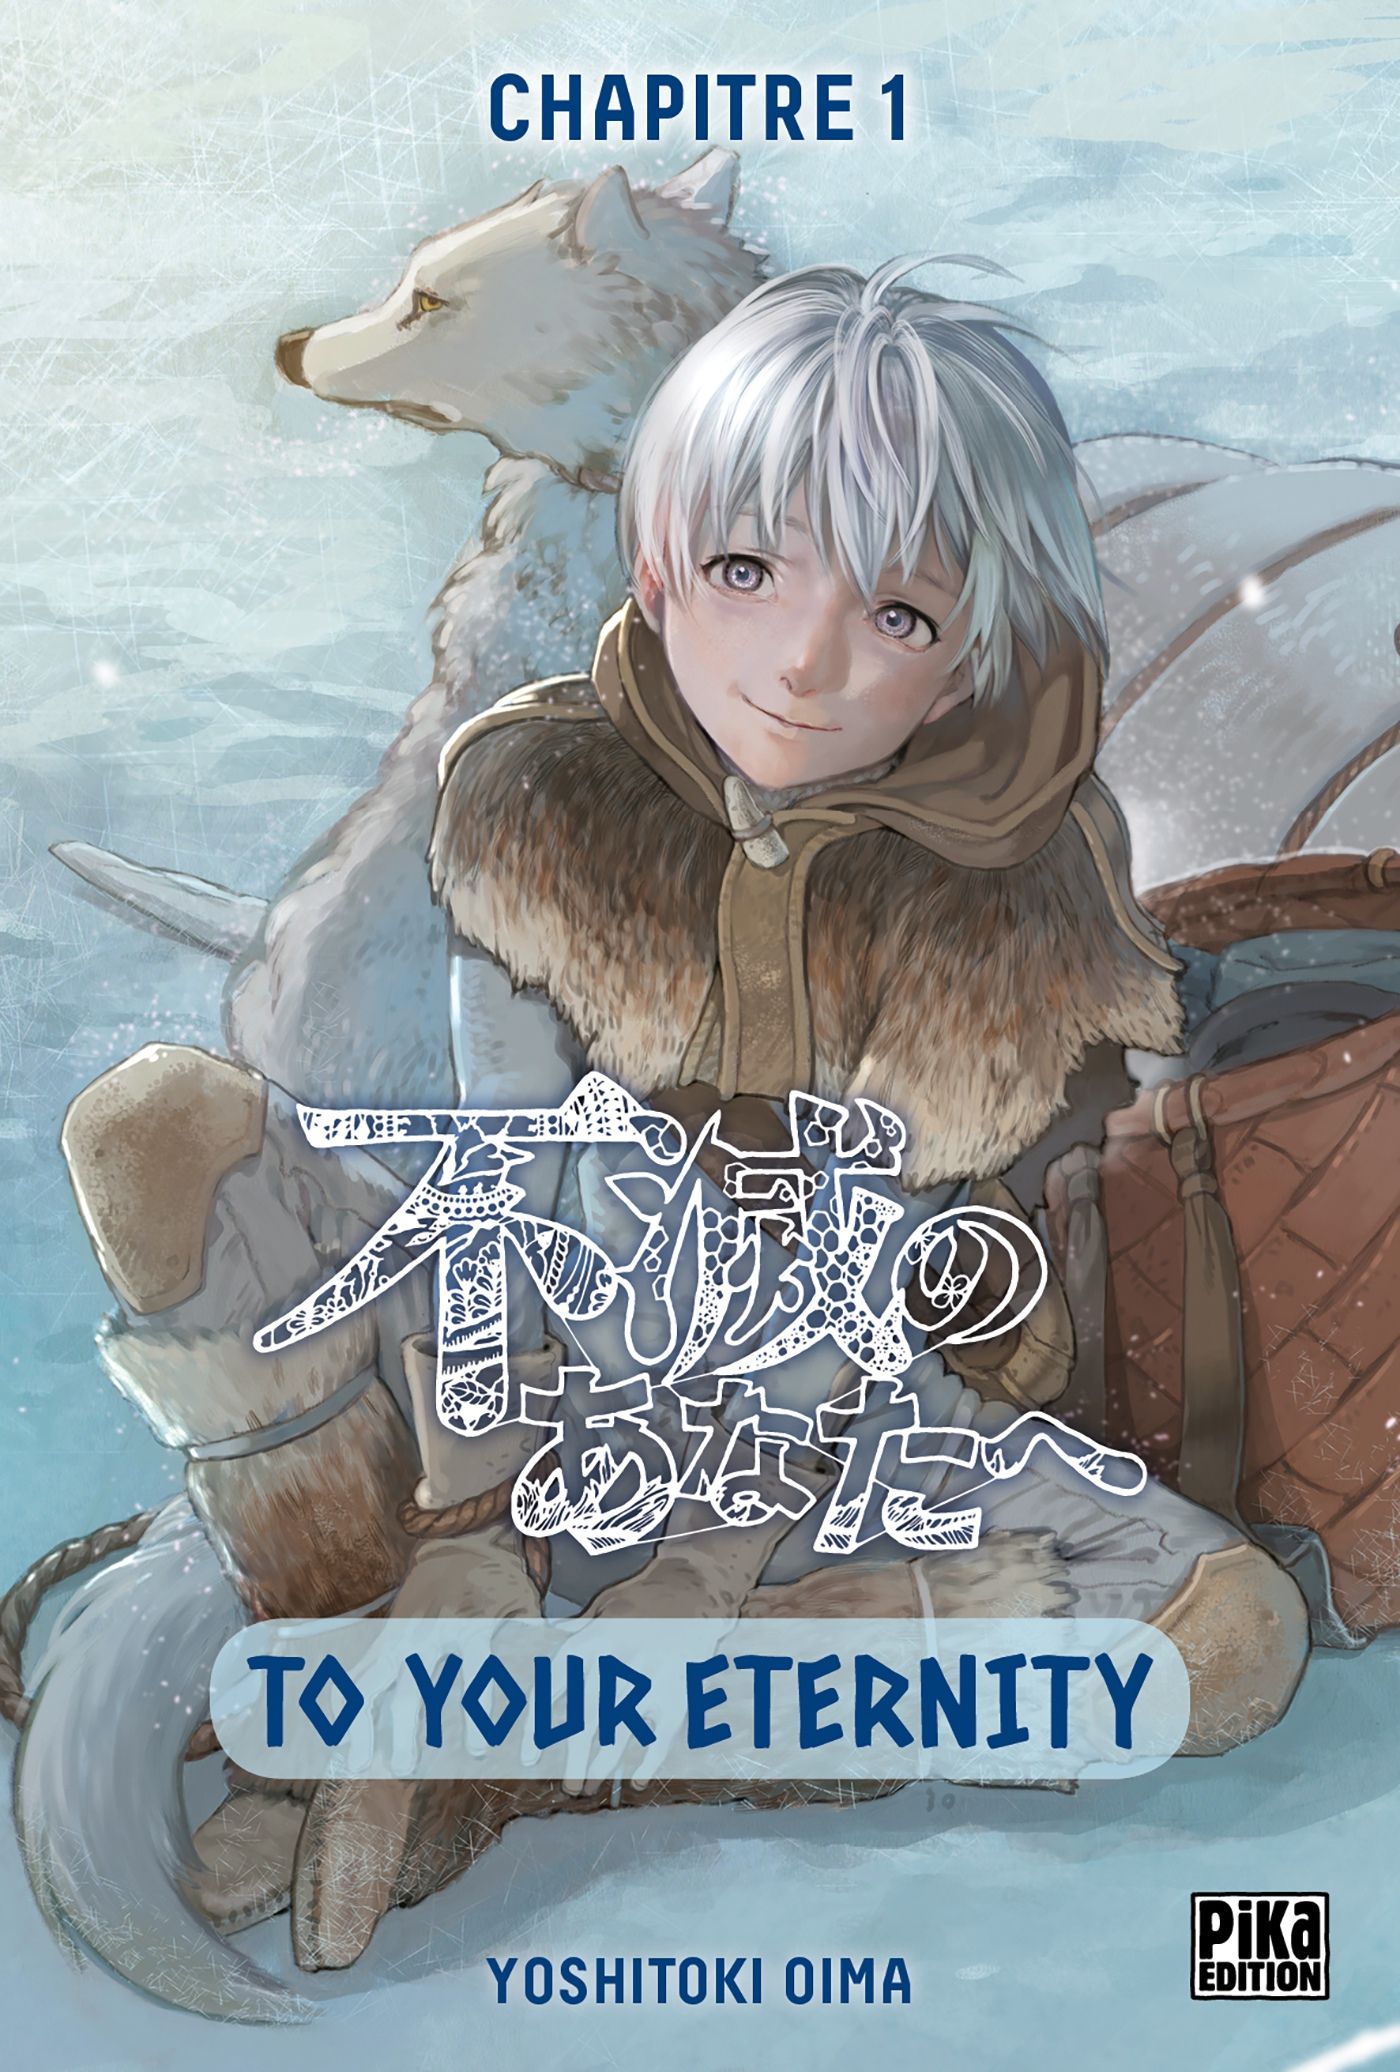 To Your Eternity Genre